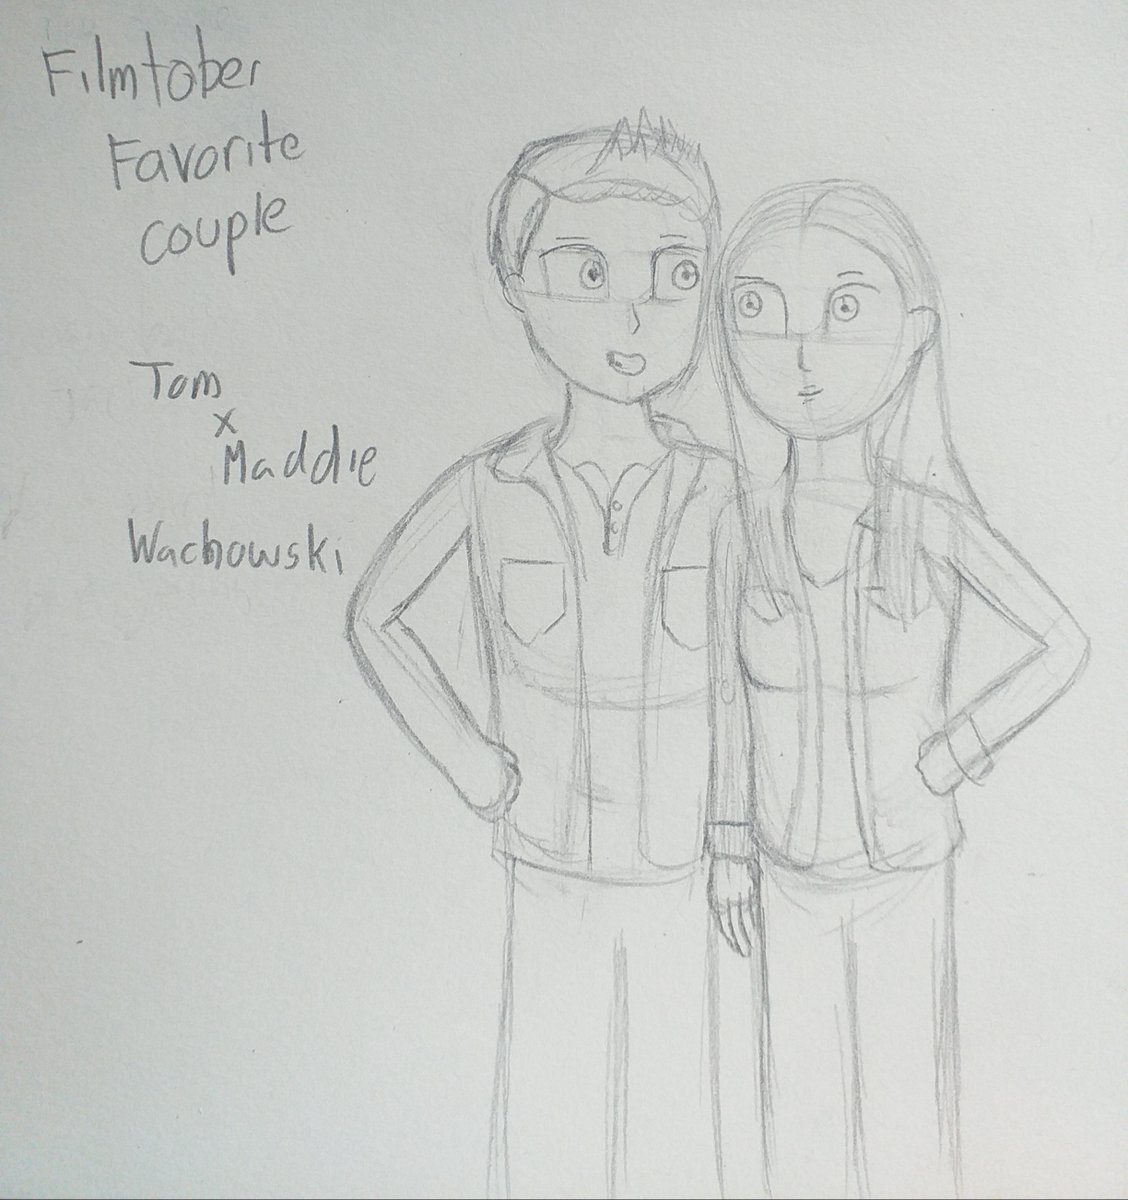 in today's filmtober it's all about the love as today's challenge is favorite couple
Sonic movie's Tom and Maddie Wachowski have a special place in my heart, an adorable pair with a Hedgehog son
I wish them the world https://t.co/AvcQ6lZ8aq